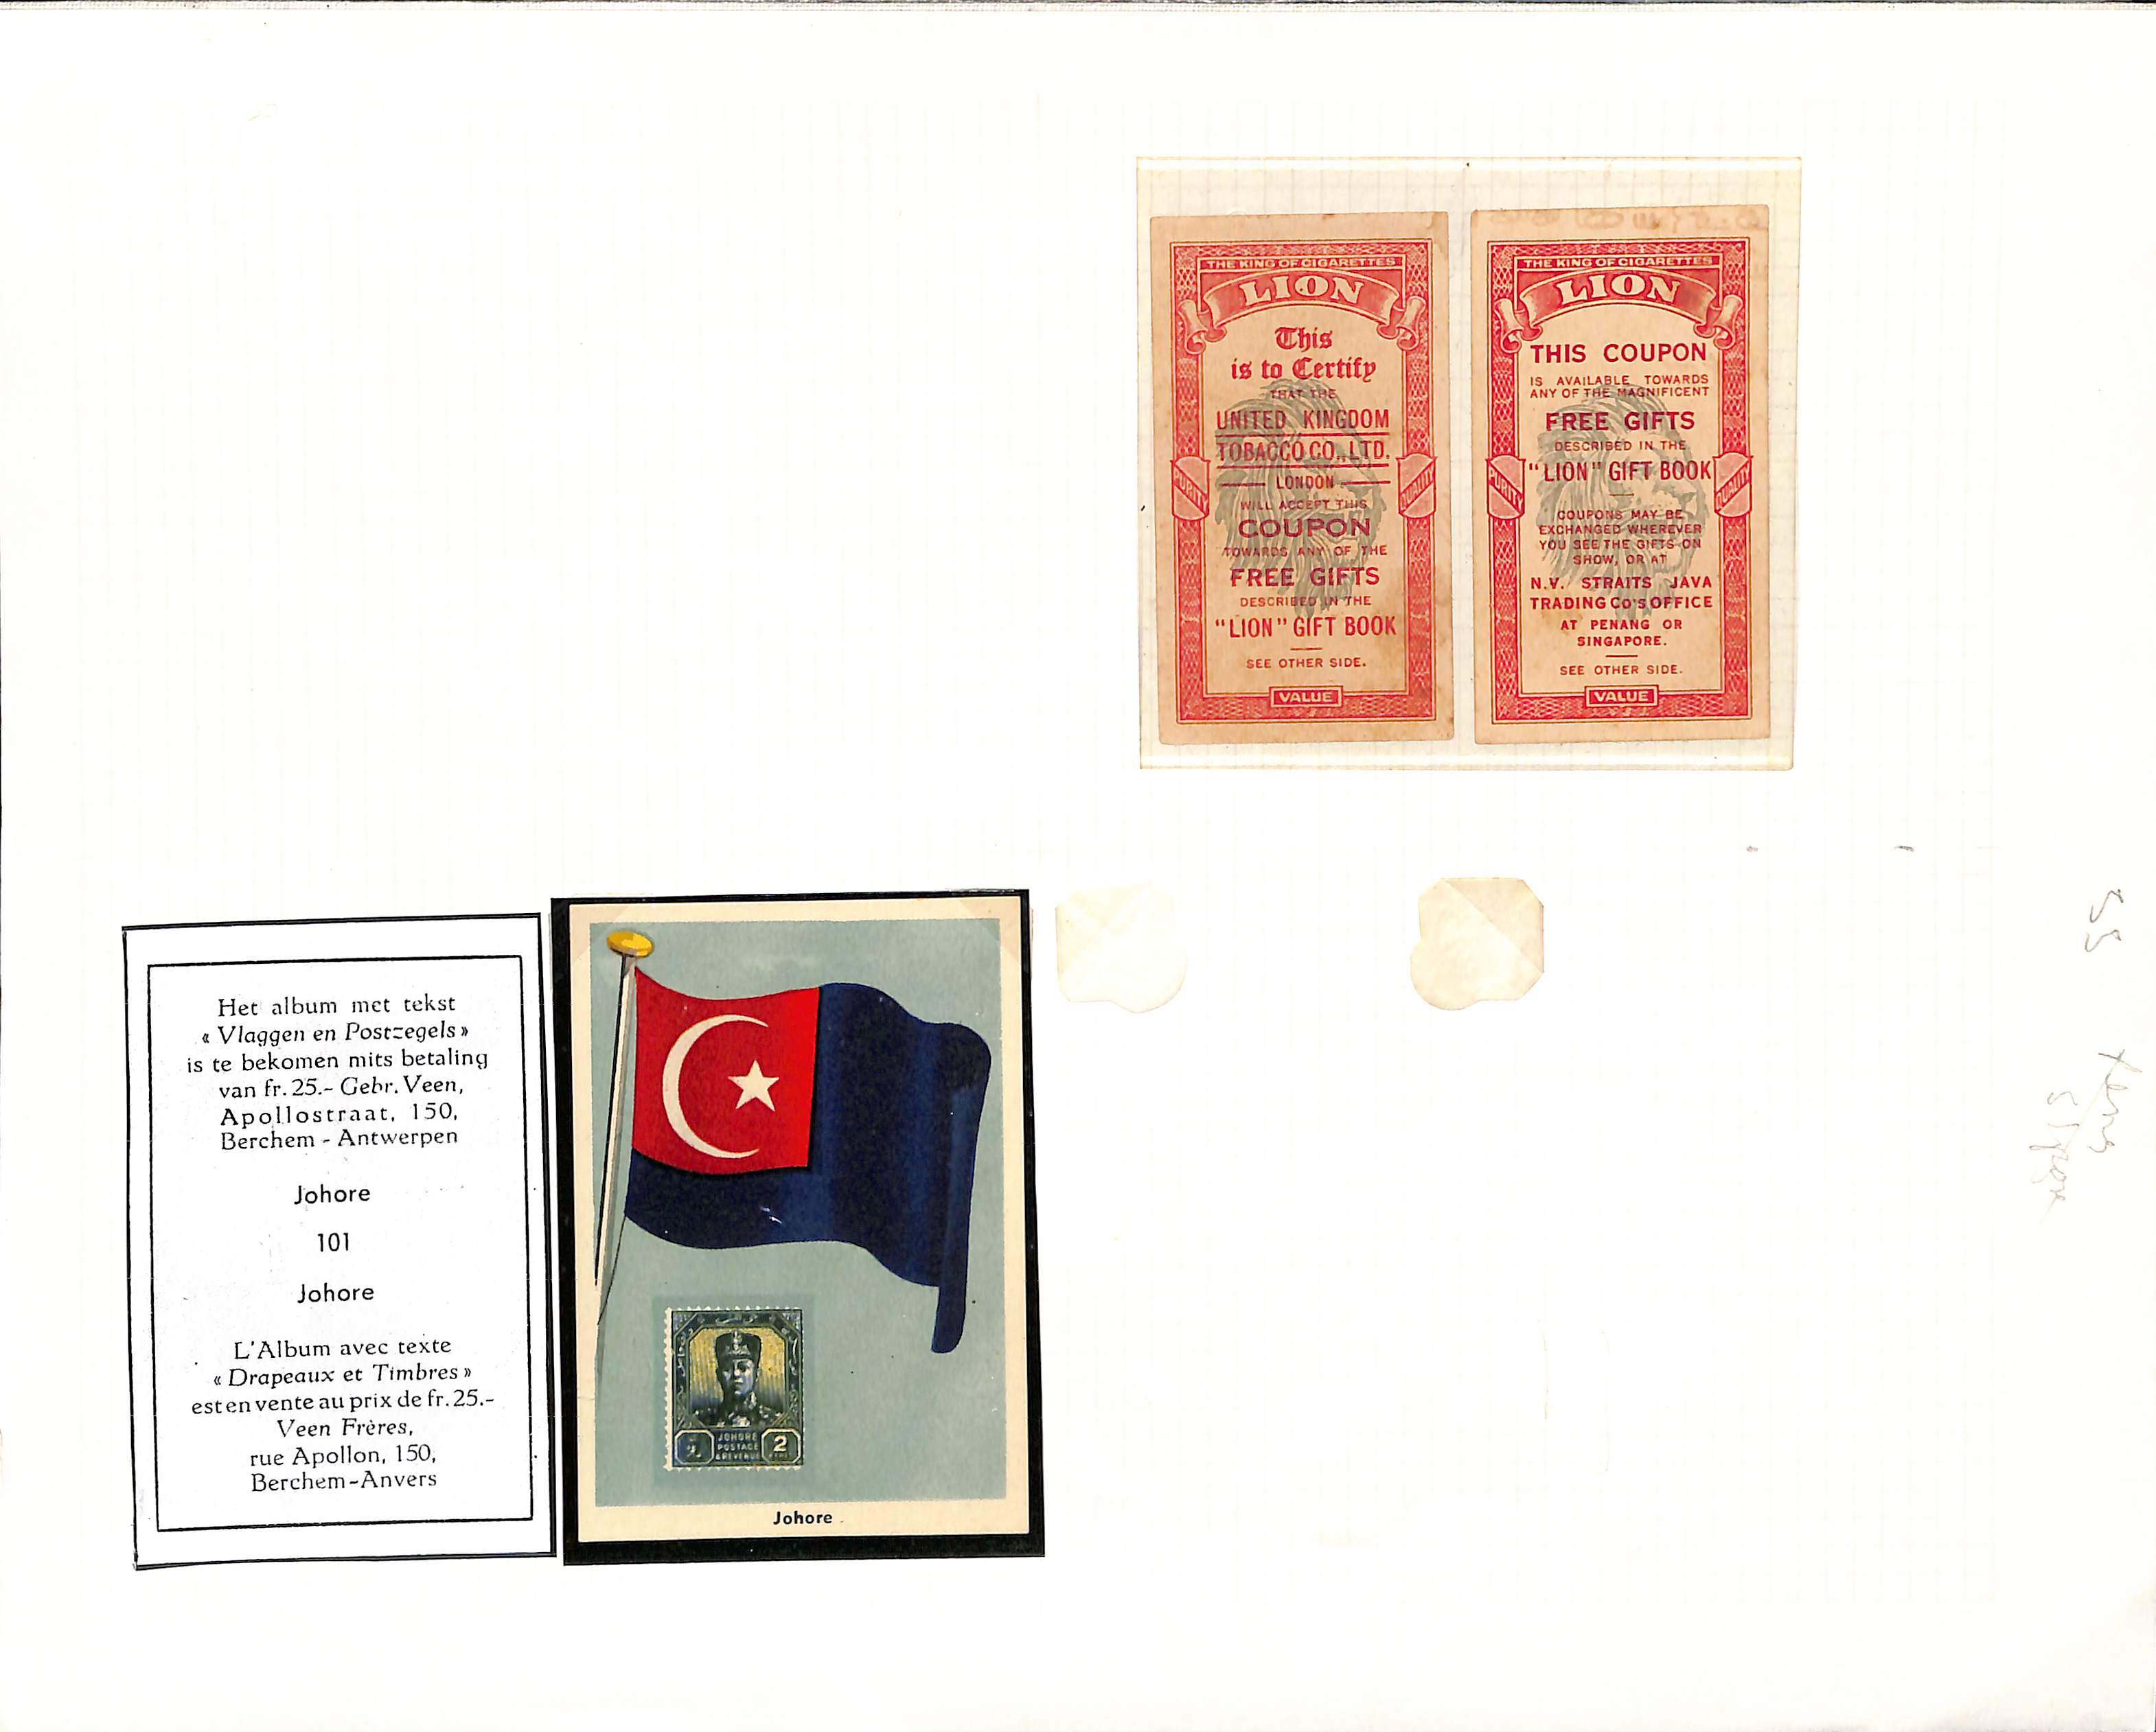 Johore. 1908-64 Covers, cards and ephemera including 1913 Red Band envelope from Kota Tinggi to - Image 7 of 7